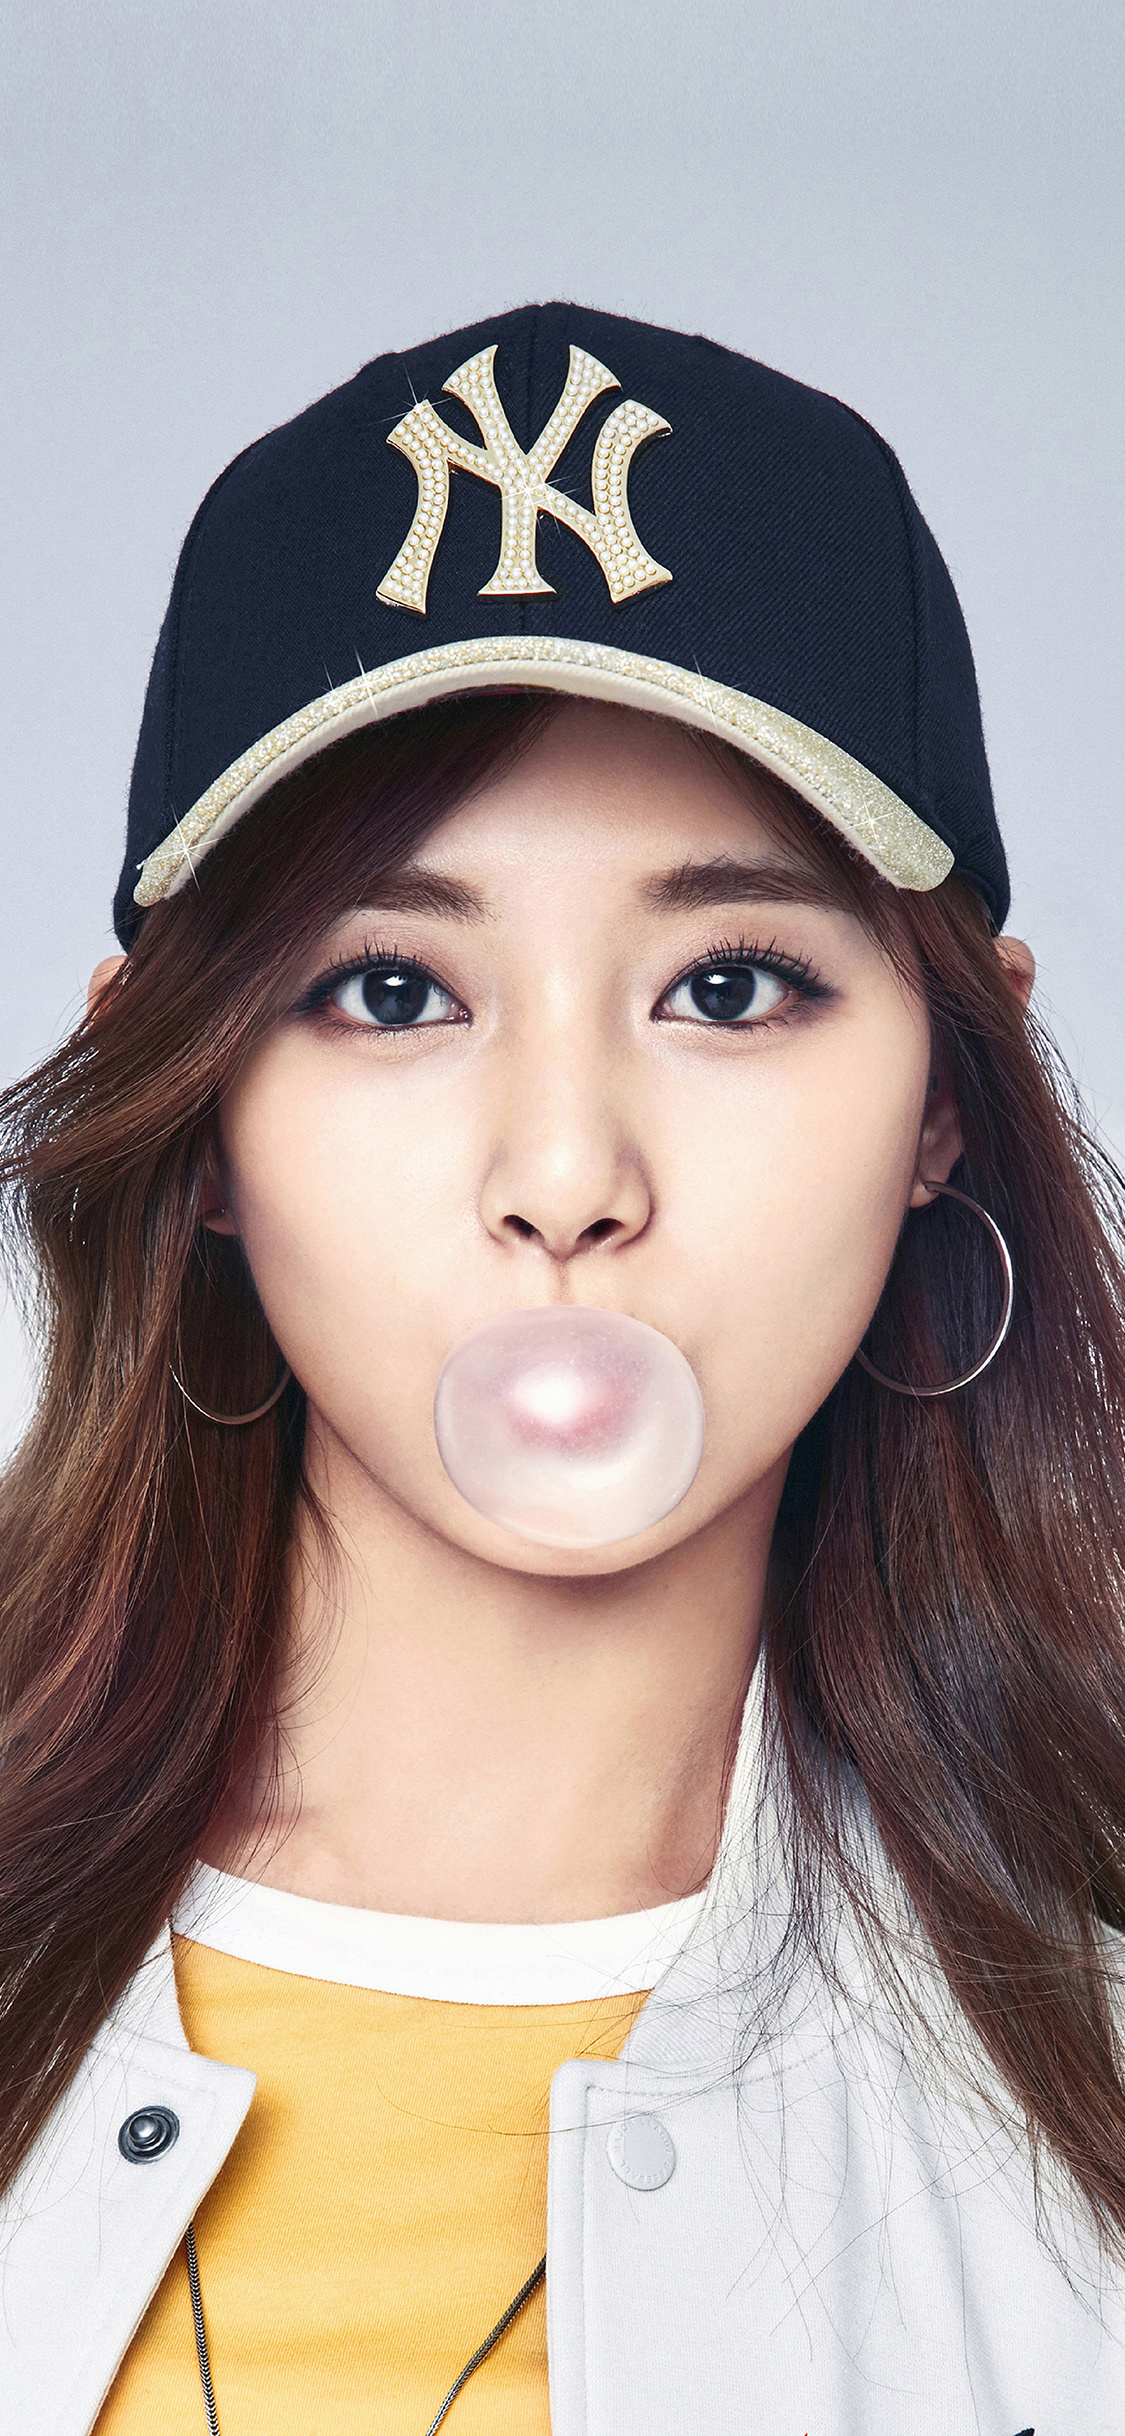 K-pop girl blowing bubble gum, Trendy and stylish, Asian pop inspiration, Bubble-blowing beauty, 1130x2440 HD Phone